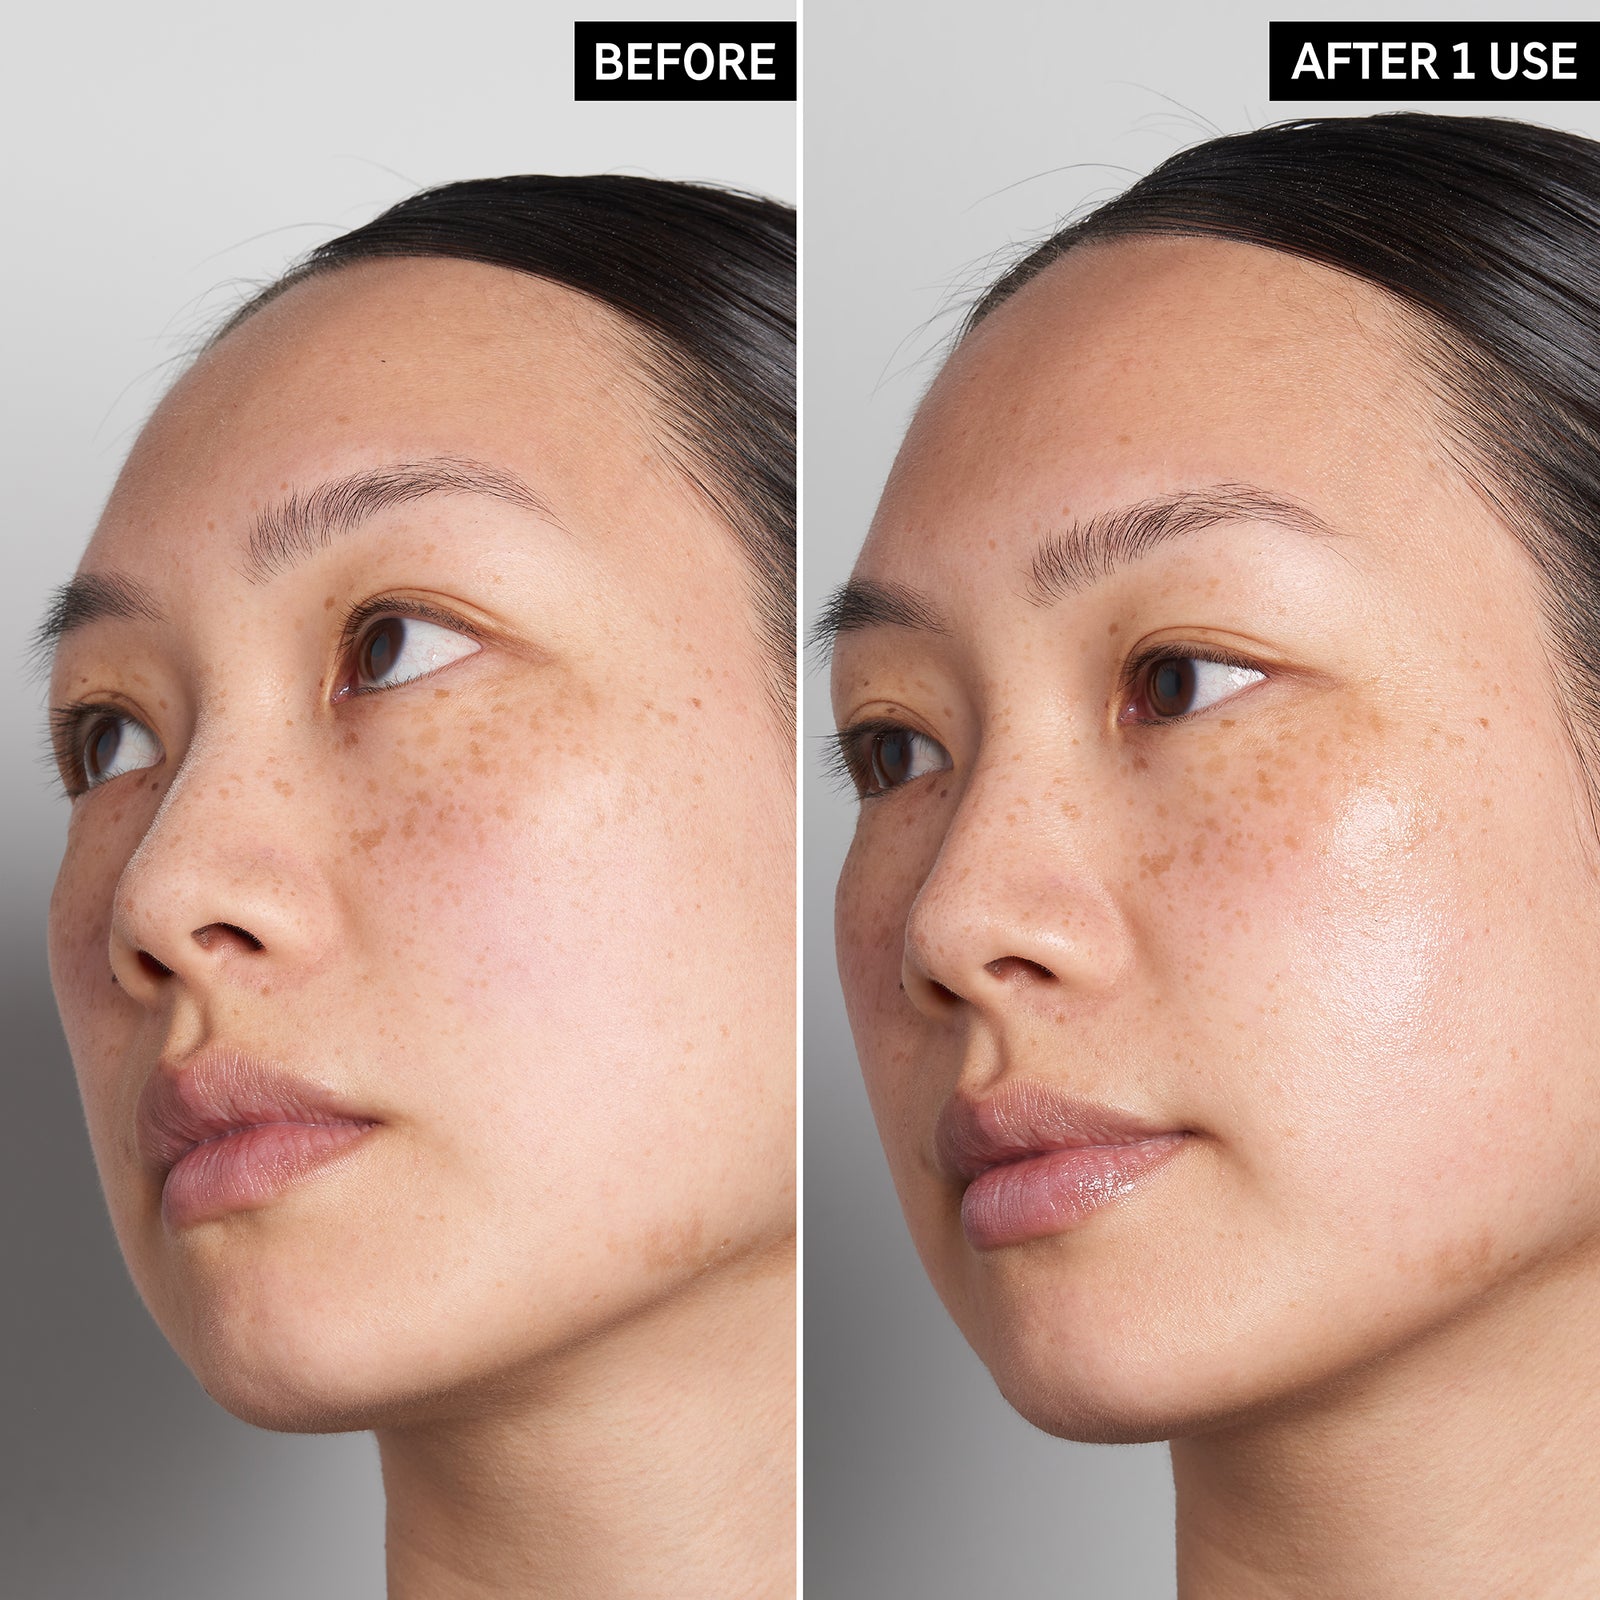 Two images of a model's face to show before and after using Supersize Hyaluronic Acid Serum just once